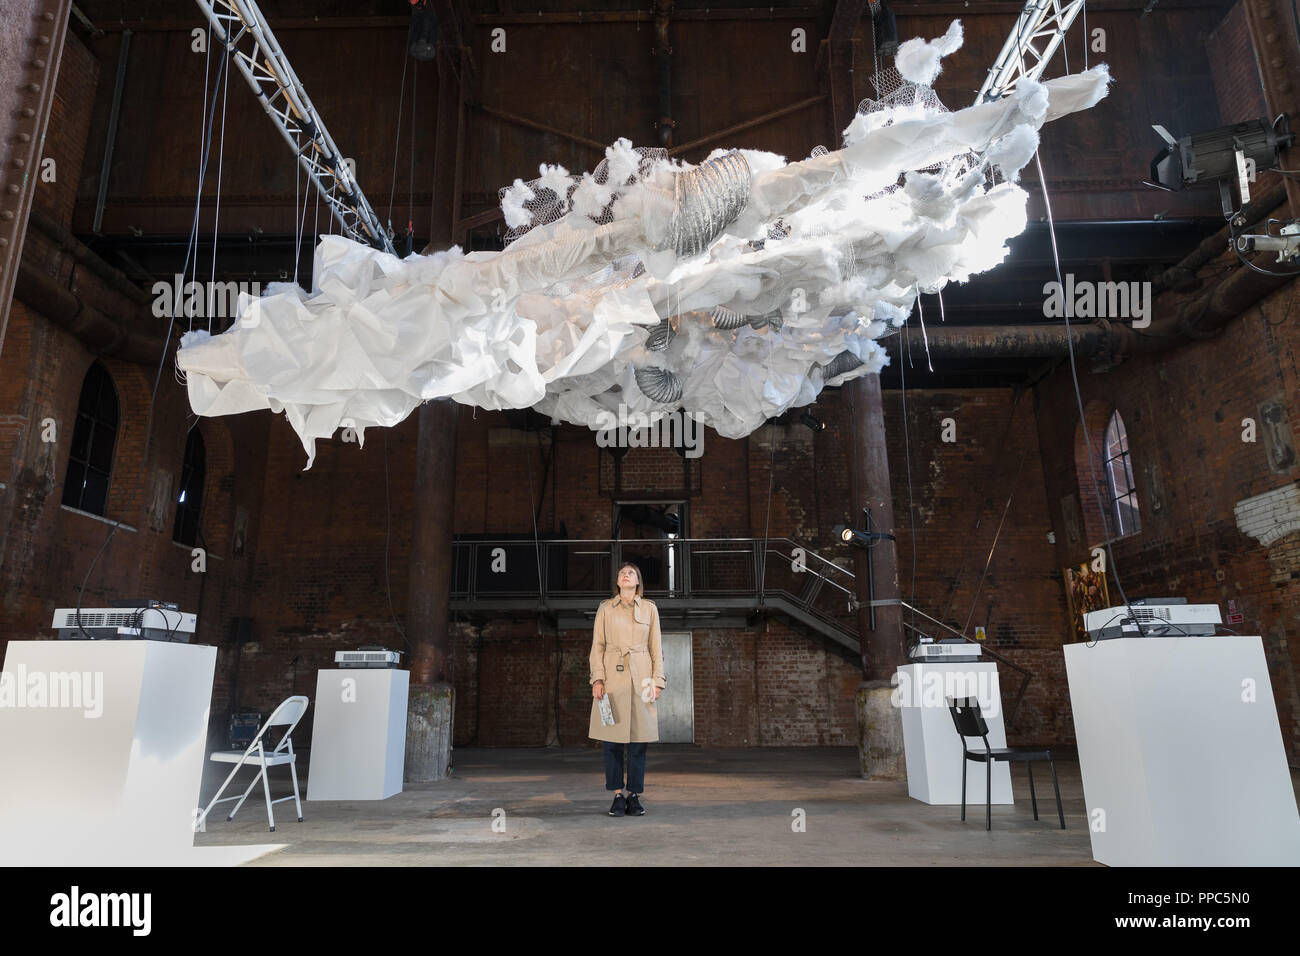 London, UK. 25th September 2018. A visitor looks at Oelun by Kamilla Gabdullina, which is seen suspended from the ceiling. The Focus Kazakhstan: Post-Nomadic Mind exhibition features emerging and established artists and examines Kazakh contemporary art as a form of multi-channel discourse, drawing parallel dialogues between contemporary artists, their Soviet predecessors, and the newly termed subject matter of post-nomadism. The exhibition runs until 16th October 2018. Credit: Vickie Flores/Alamy Live News Stock Photo